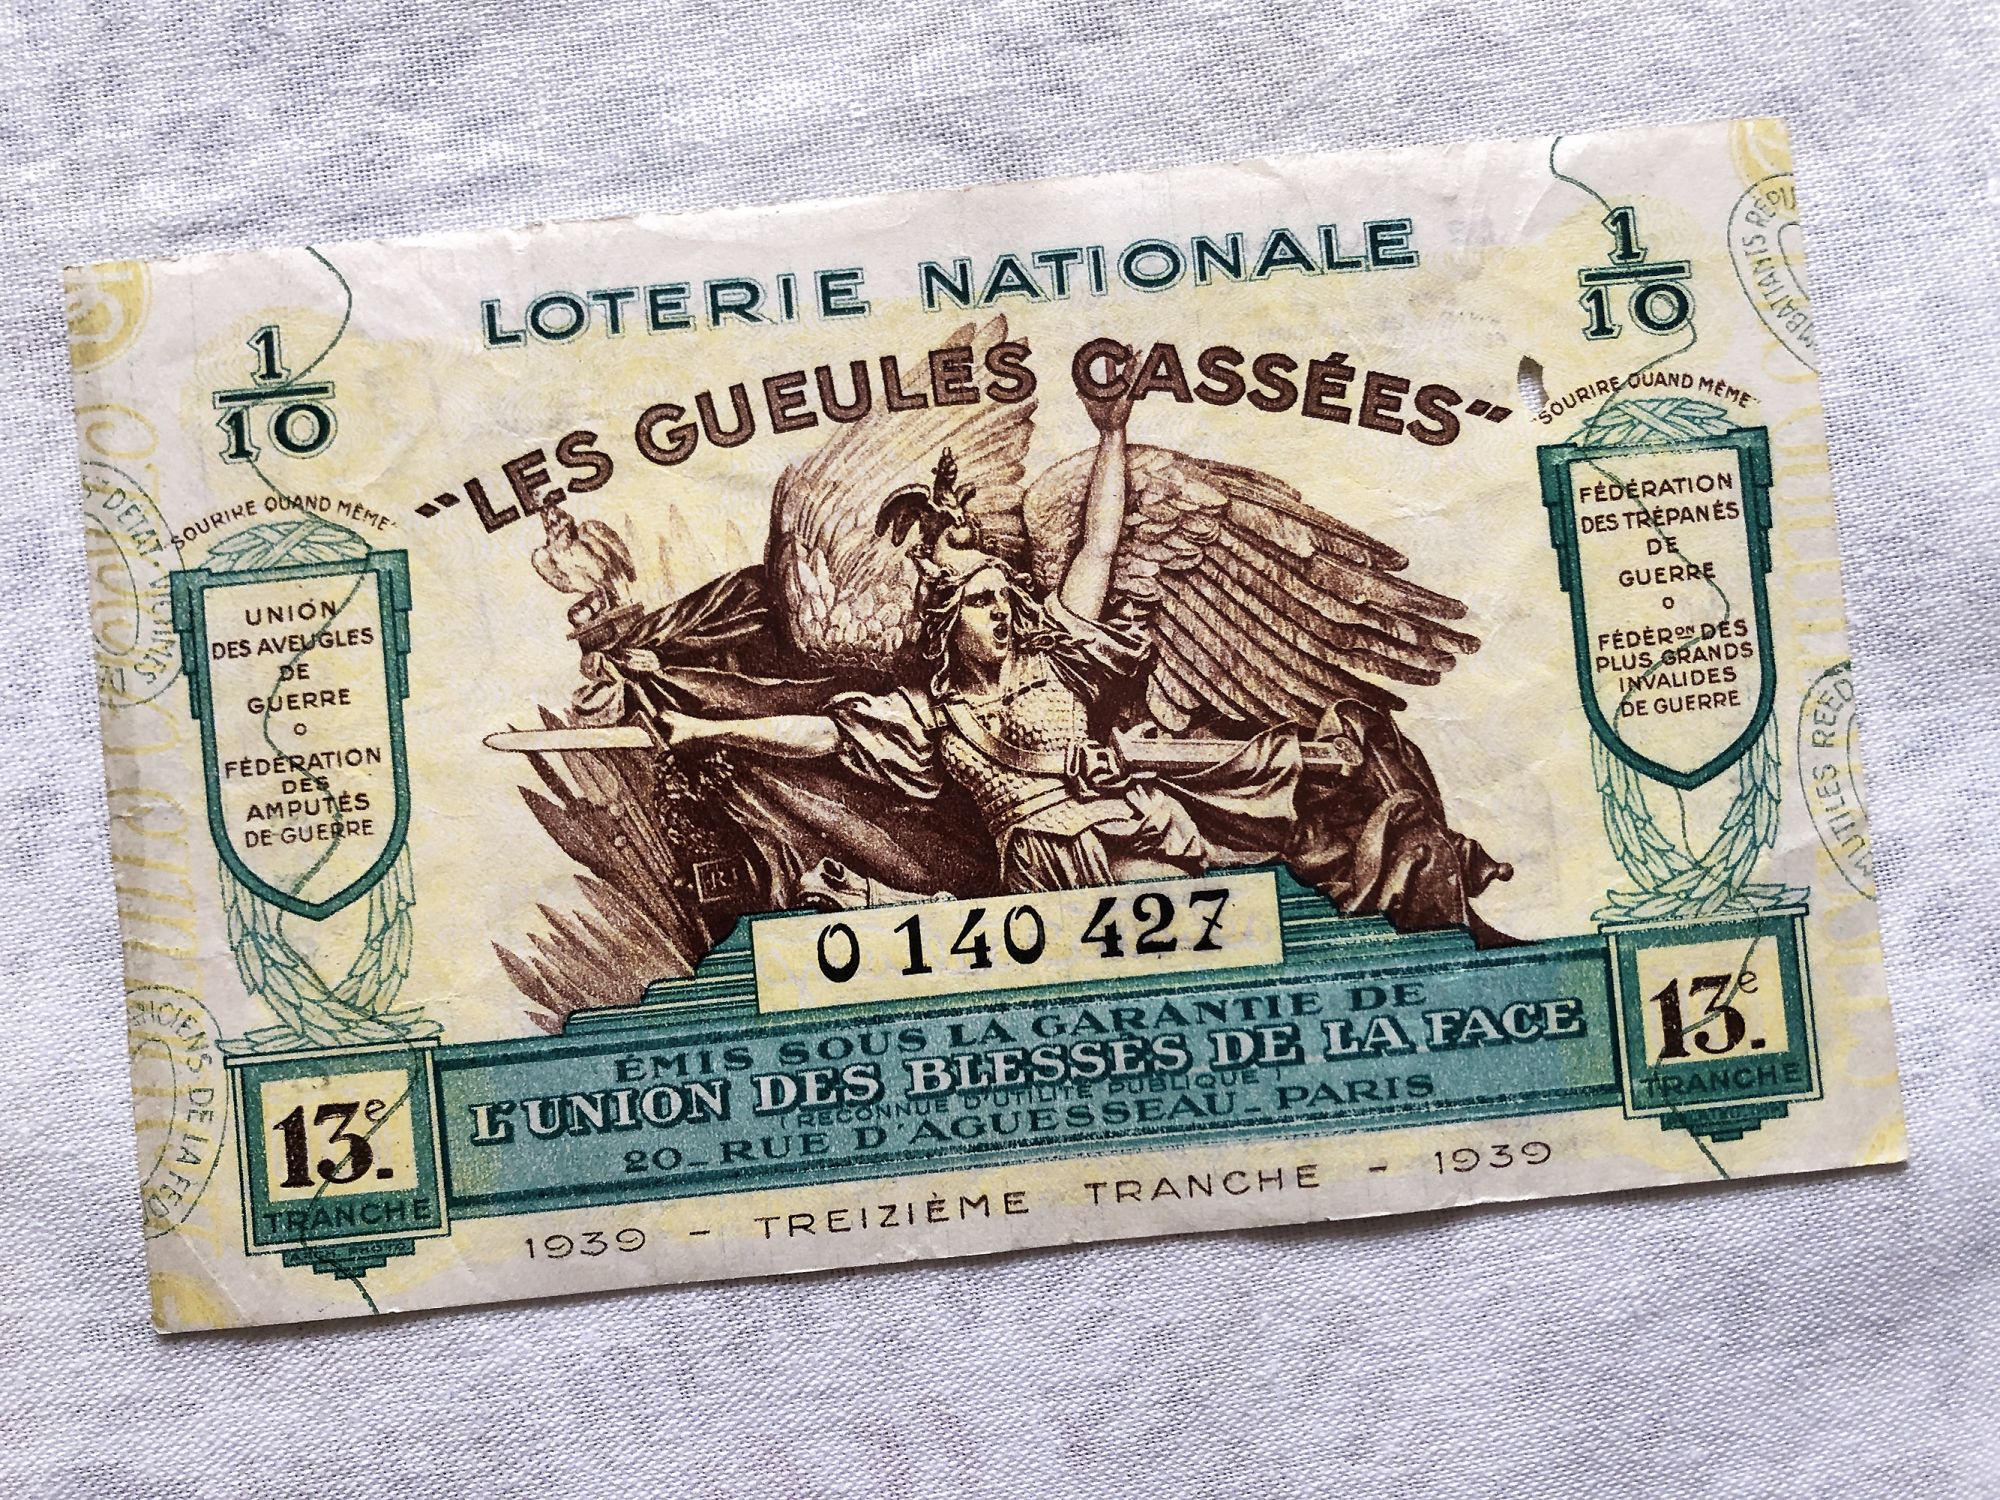 Huge French lottery tickets "Les gueules cassées" from 1939